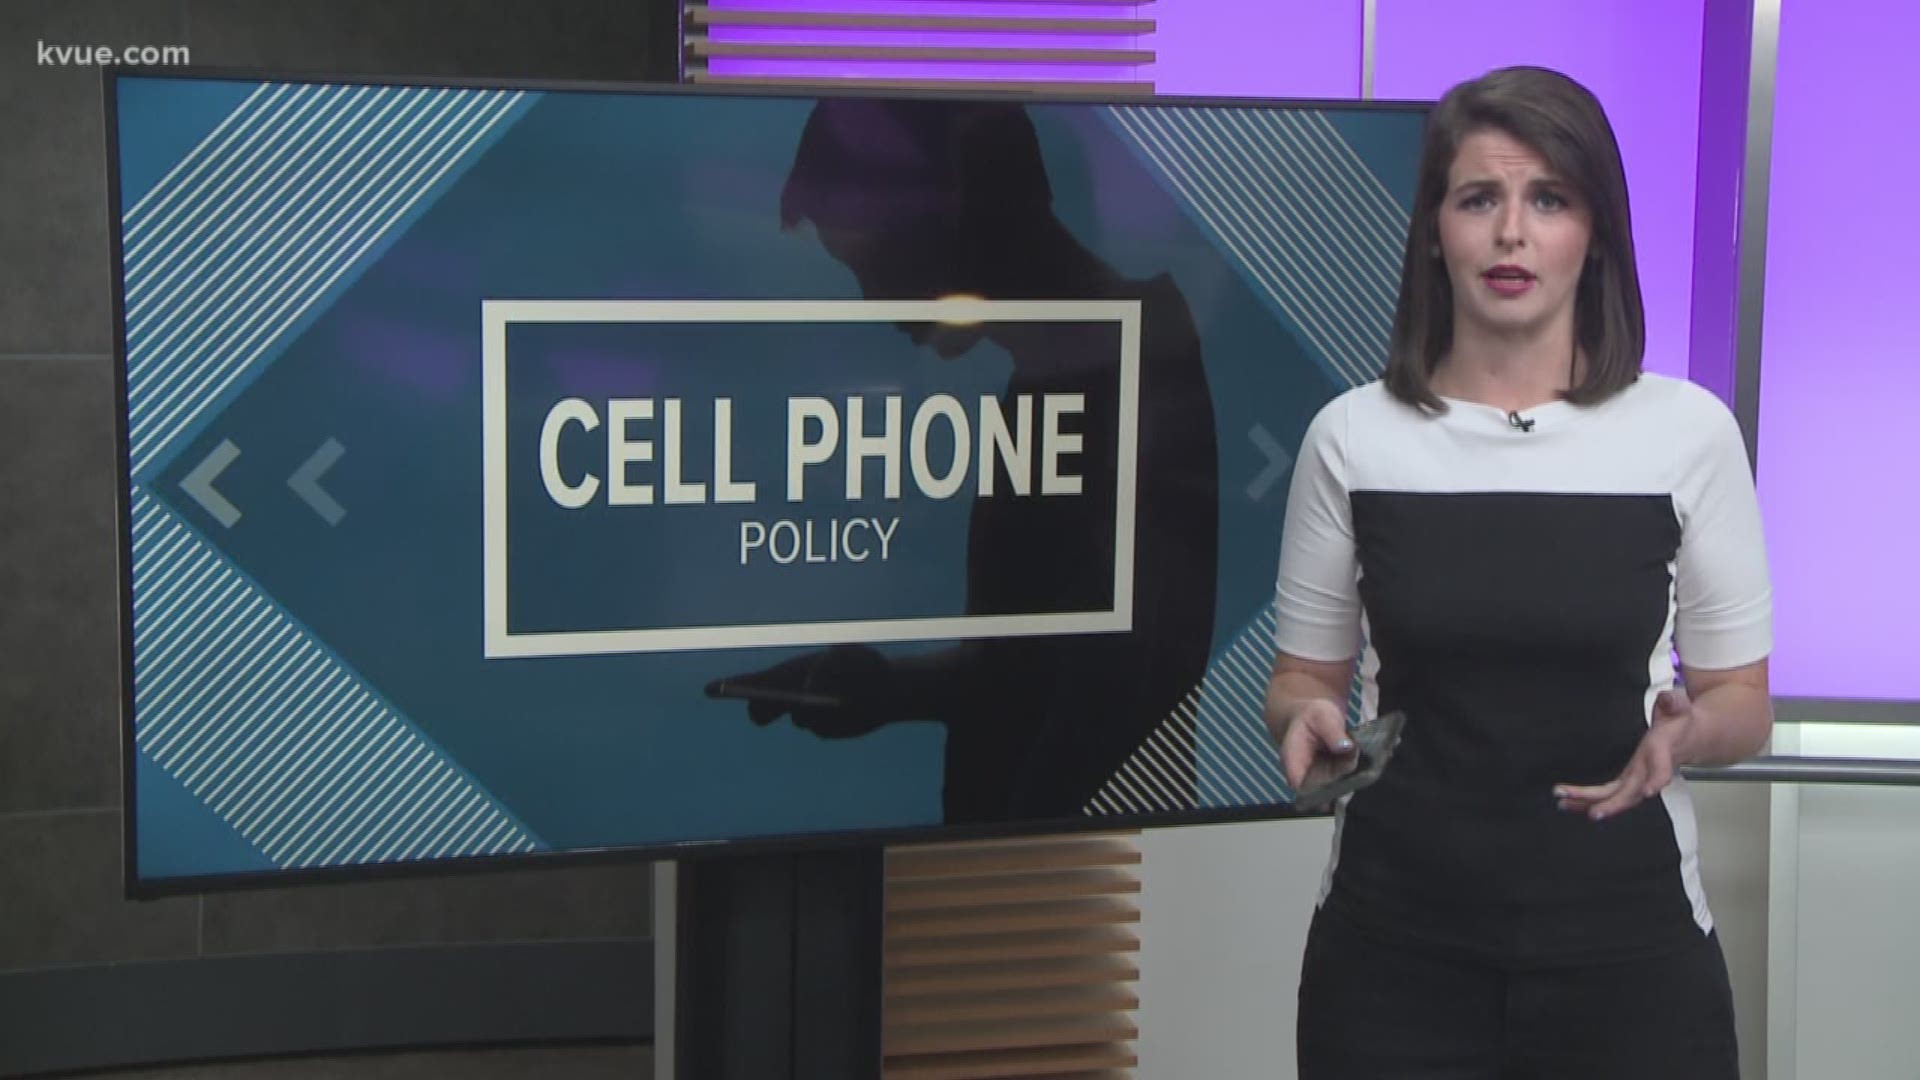 A high school in round rock is asking students to put their phones in pouches at the beginning of class...hoping to cut down on distractions. KVUE's Molly Oak headed to the classroom to see how the new policy is working.